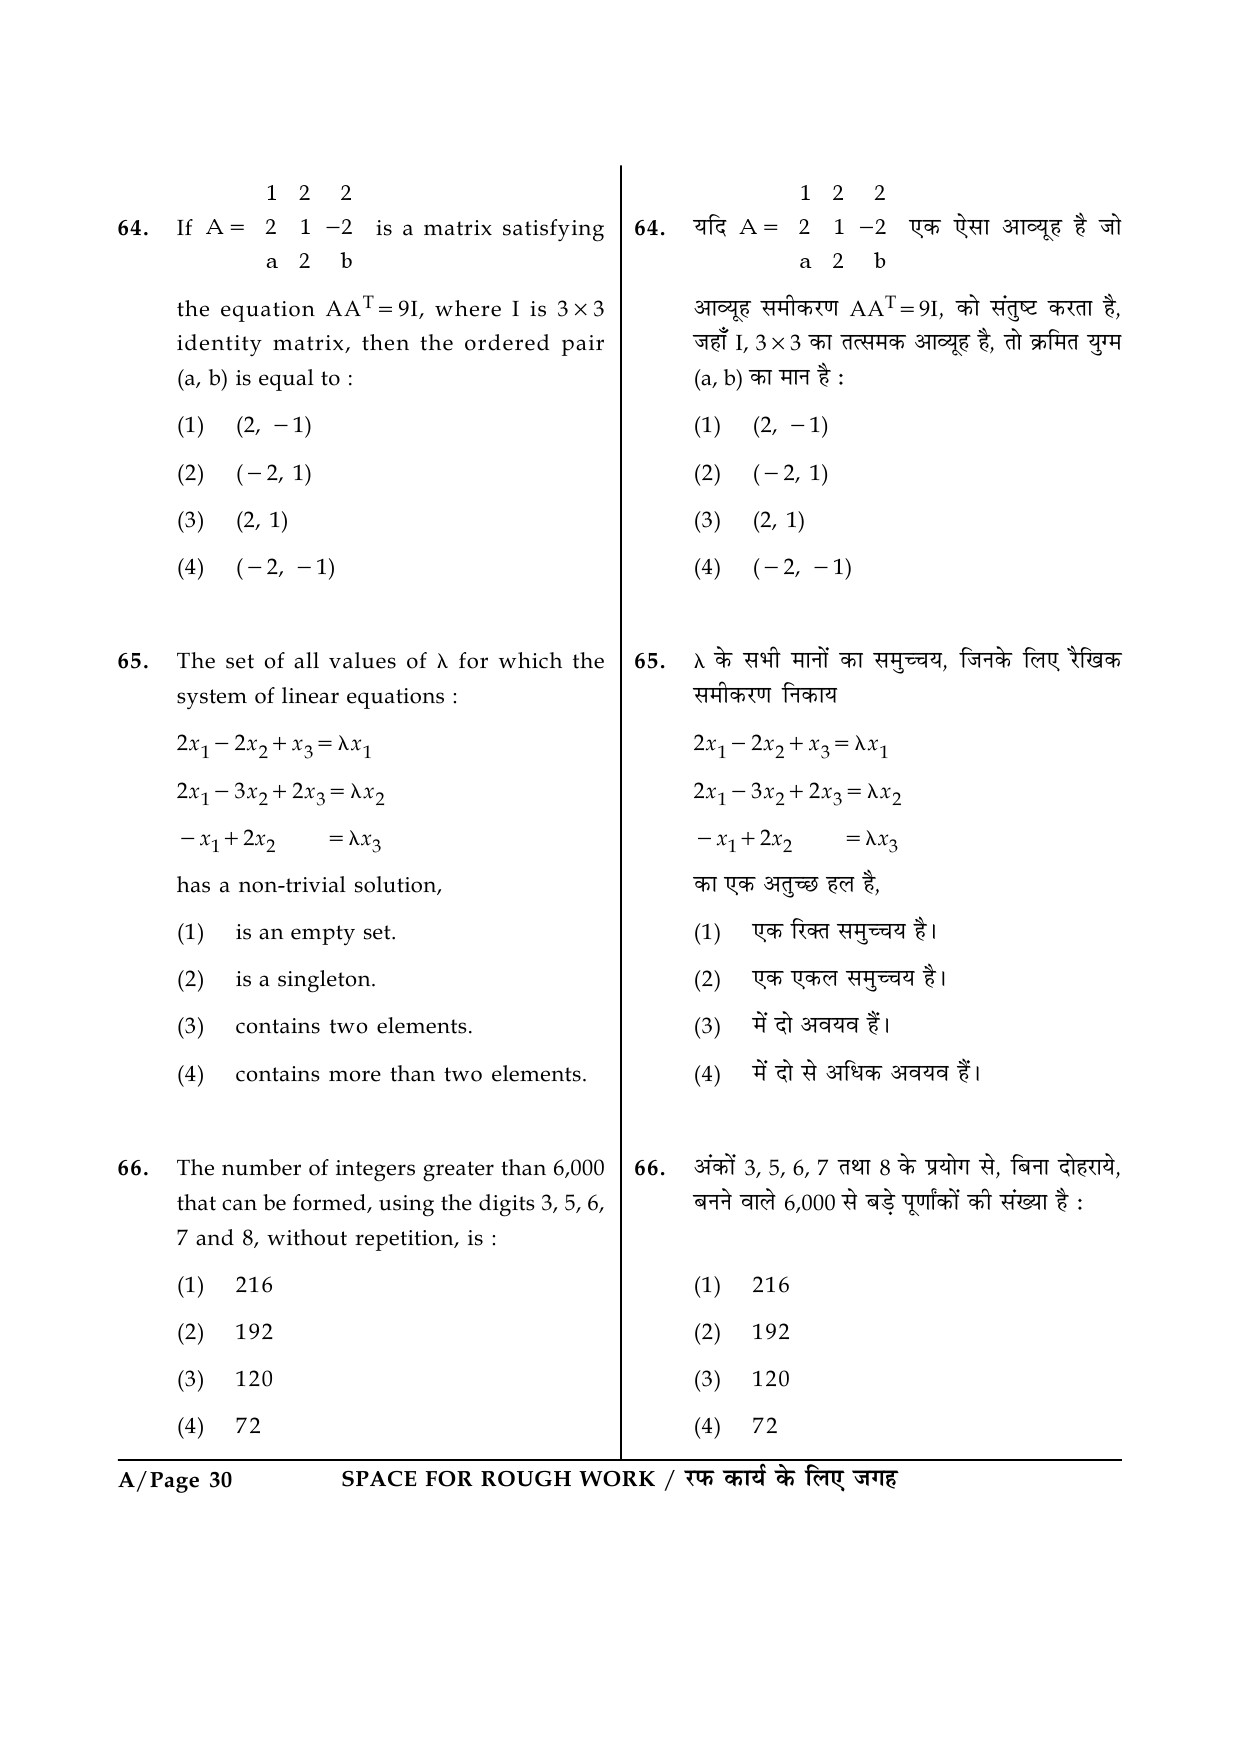 JEE Main Exam Question Paper 2015 Booklet A 30